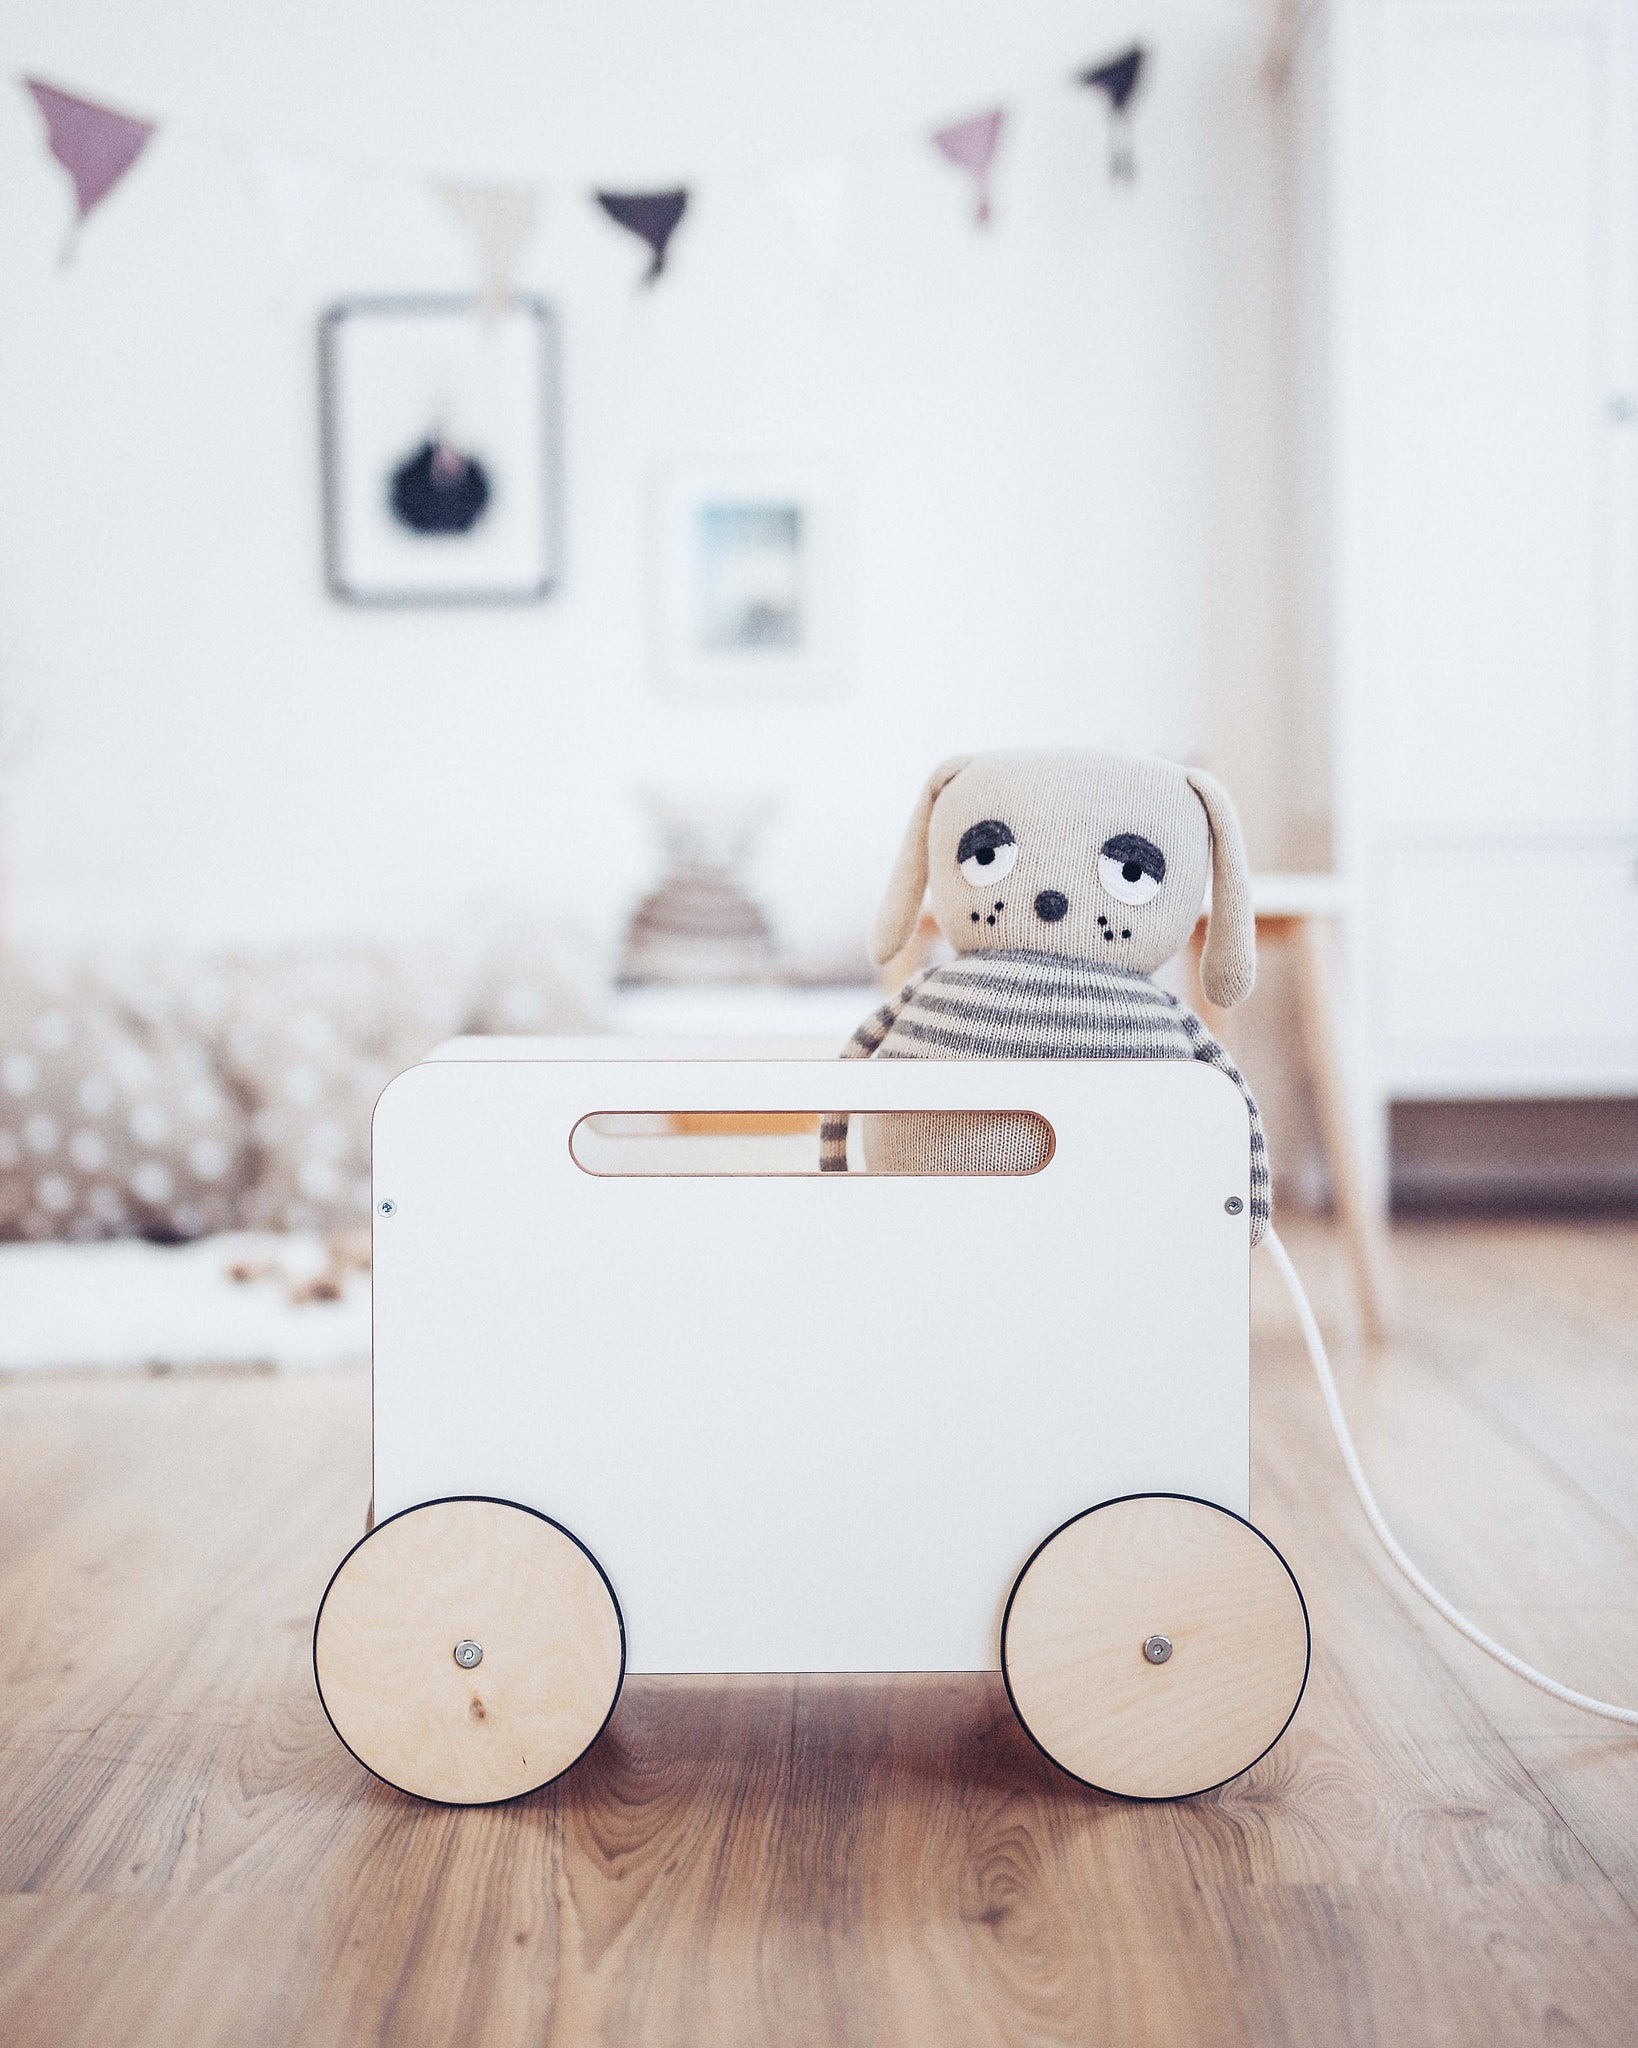 toy chest on wheels